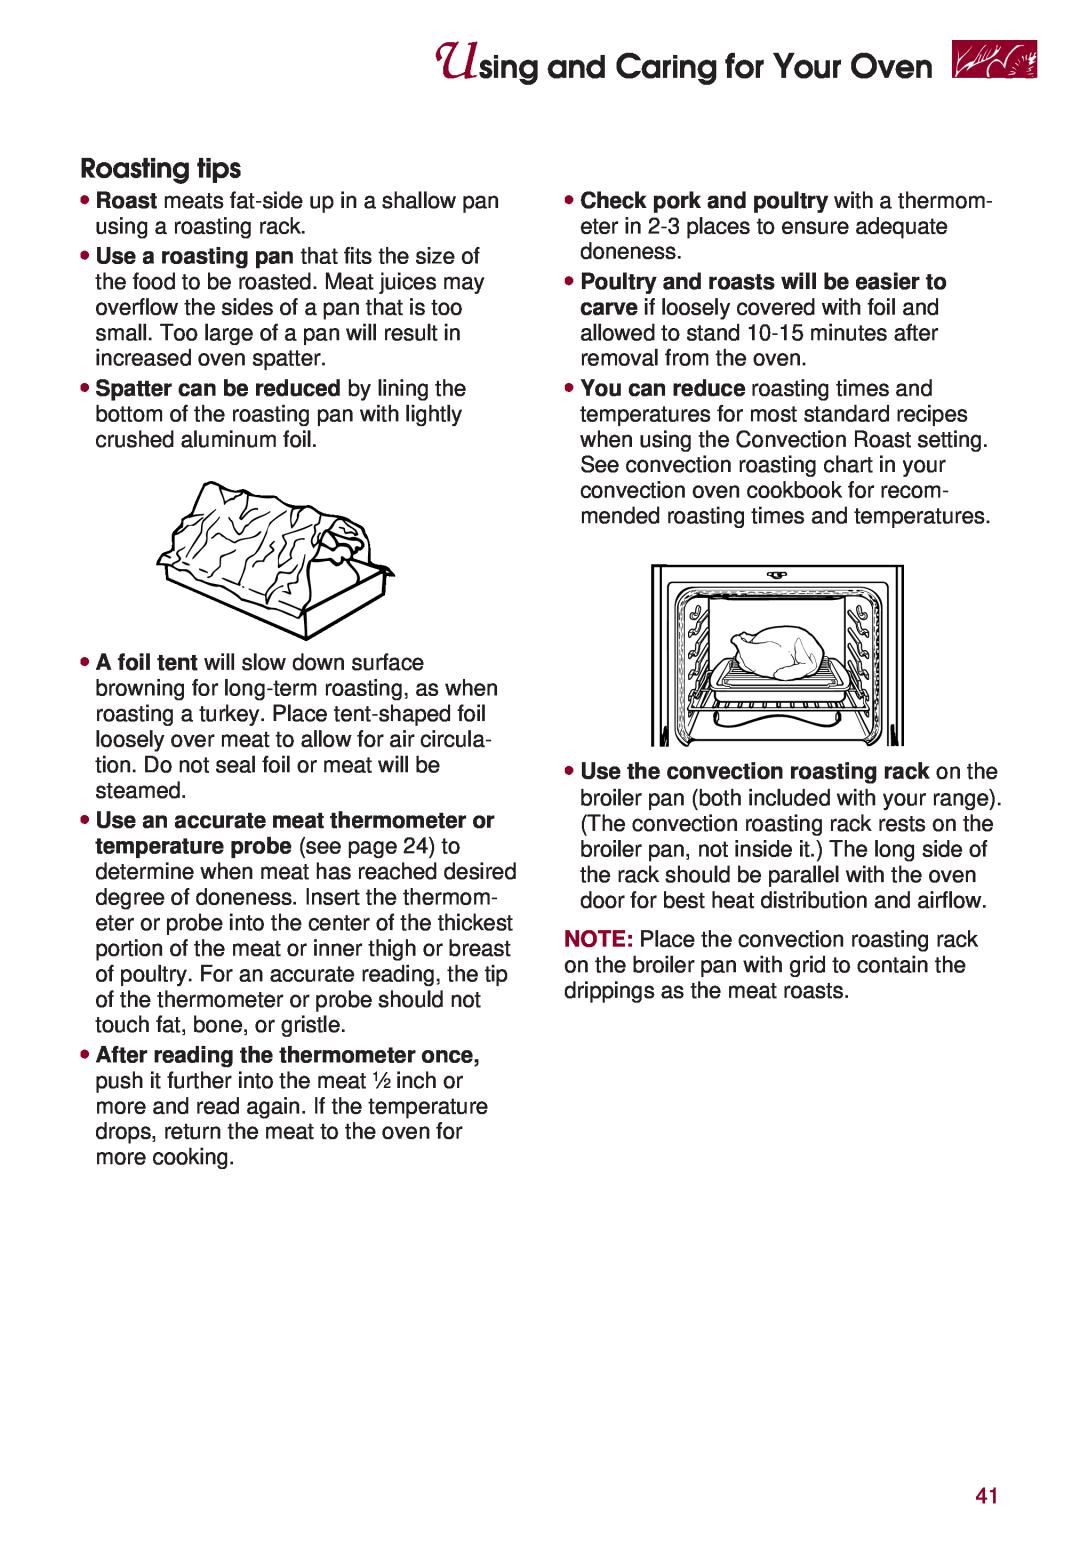 KitchenAid KERS507 warranty Roasting tips, Using and Caring for Your Oven 